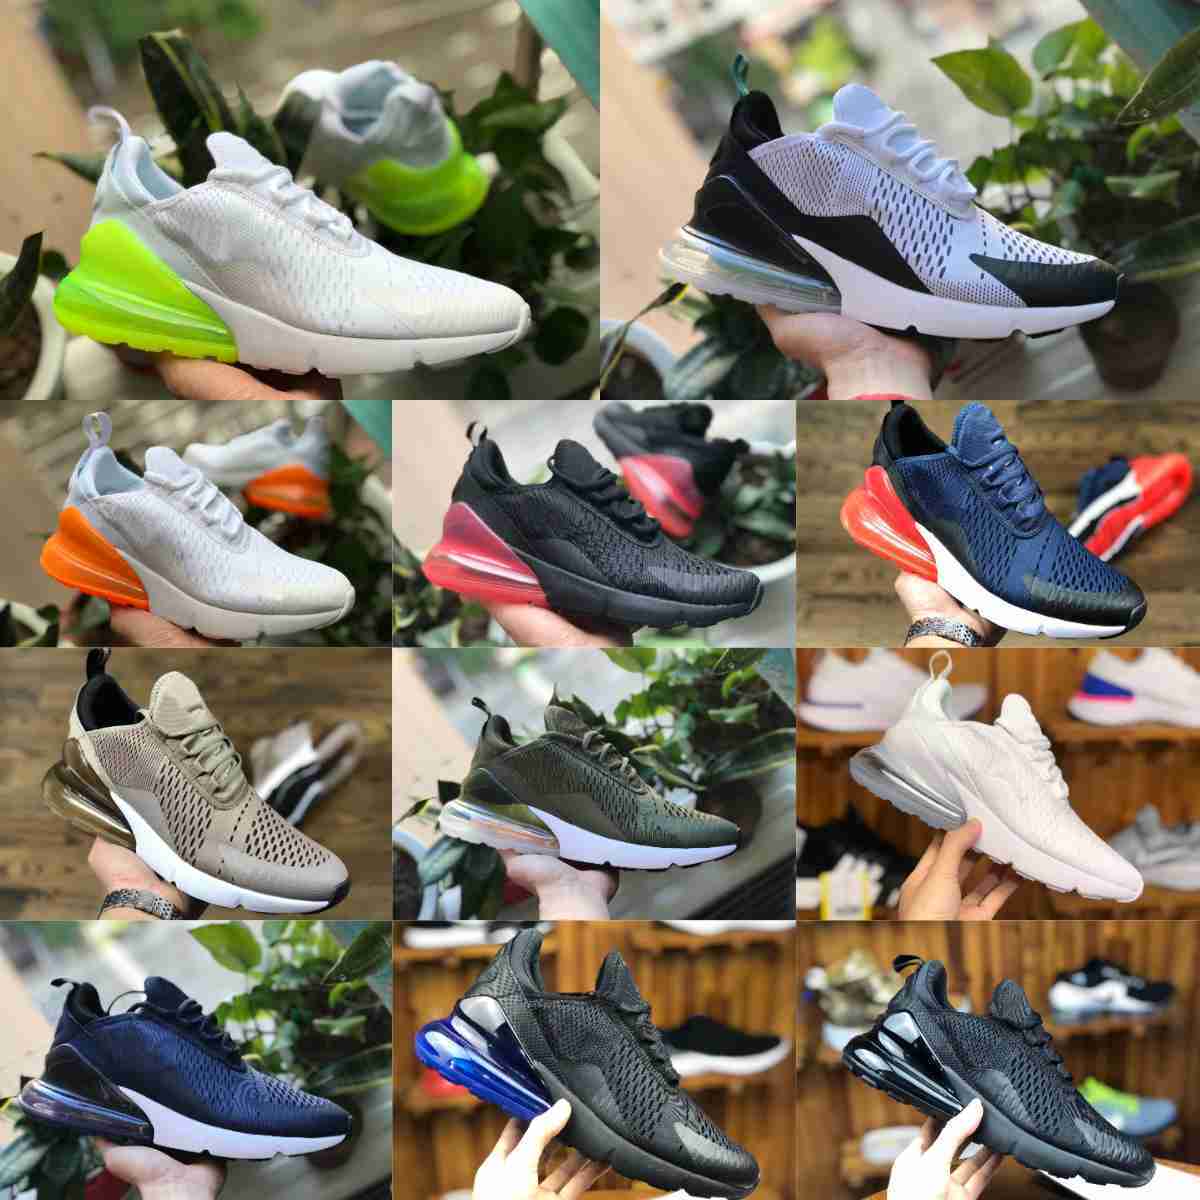 

2023 Dusty Cactus 270 Shoes Mens Tennis Runner Sneakers Light Bone Be True Barely Rose Volt Women Breathable Mesh Triple Black White 270s Trainer Sports Designers Y10, Please contact us